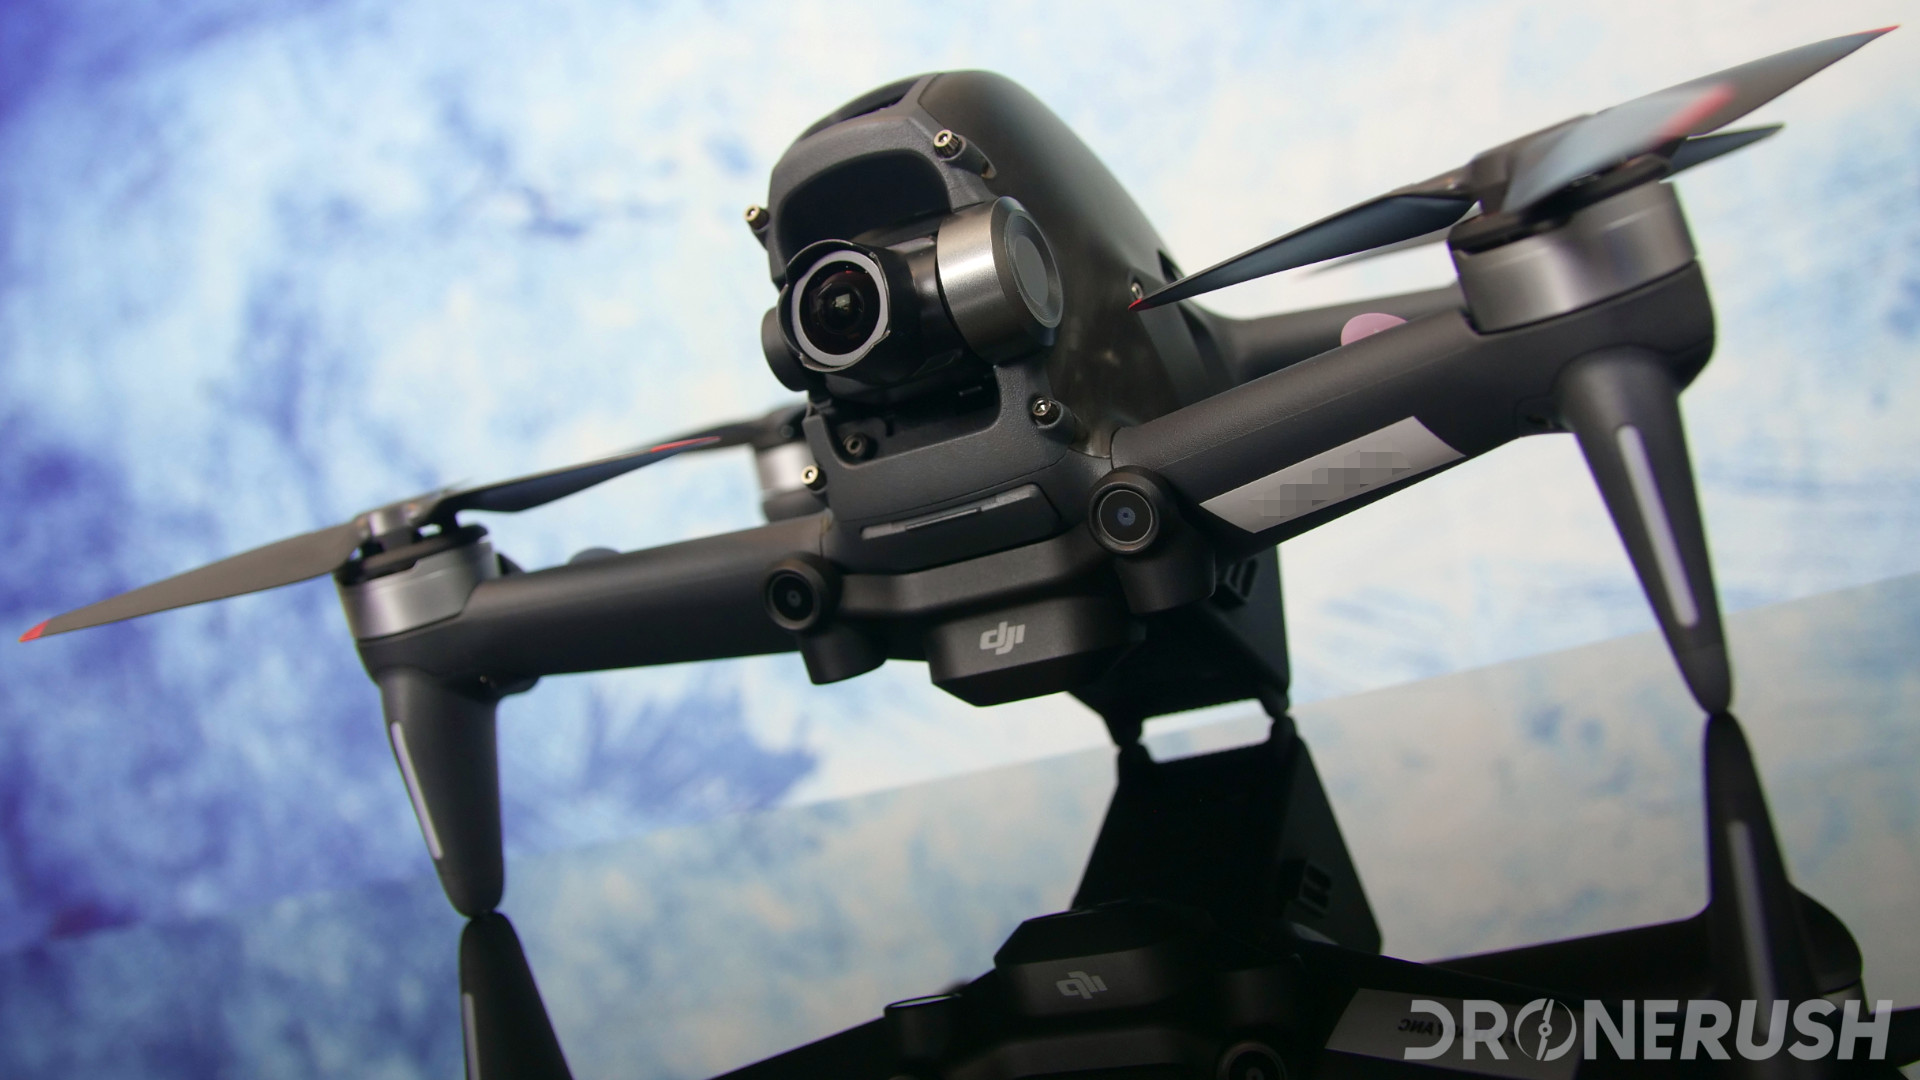 DJI's FPV racing drone looks mighty real in these leaked photos - The Verge